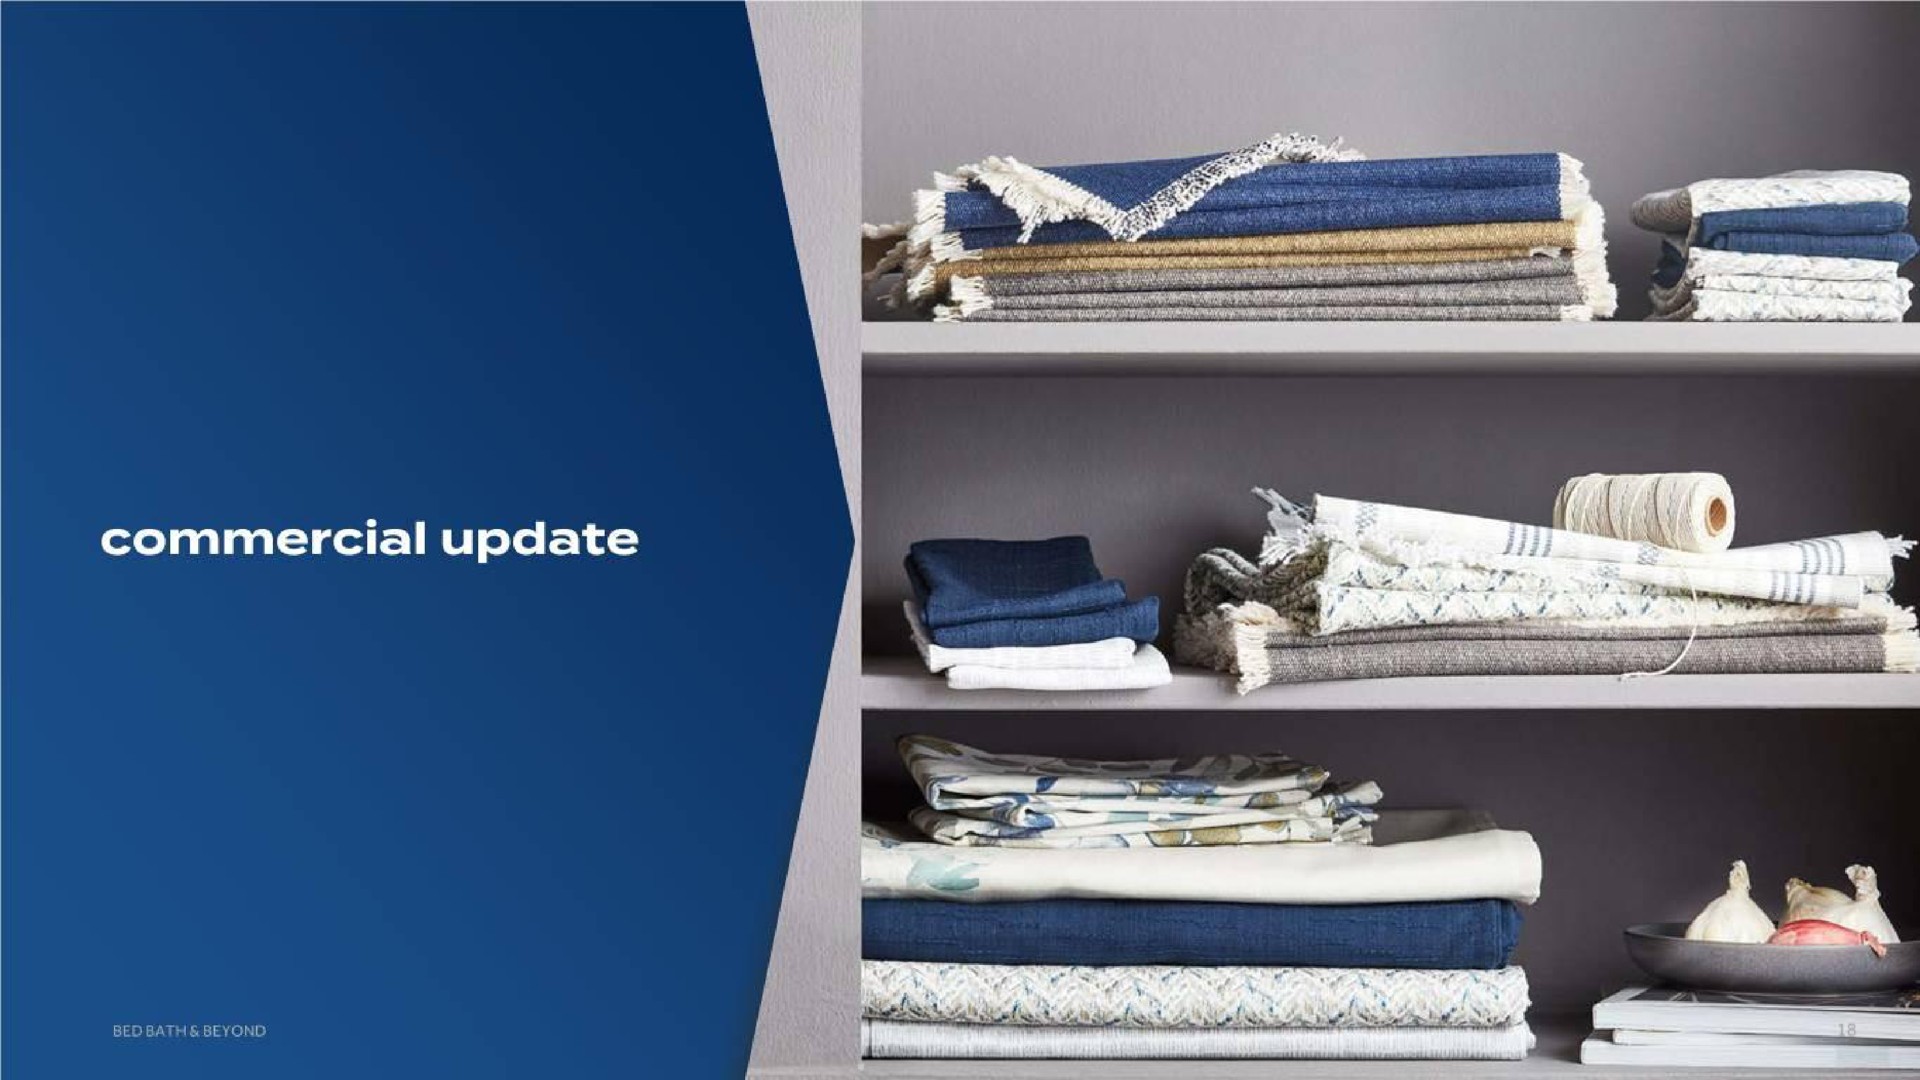 commercial update | Bed Bath & Beyond